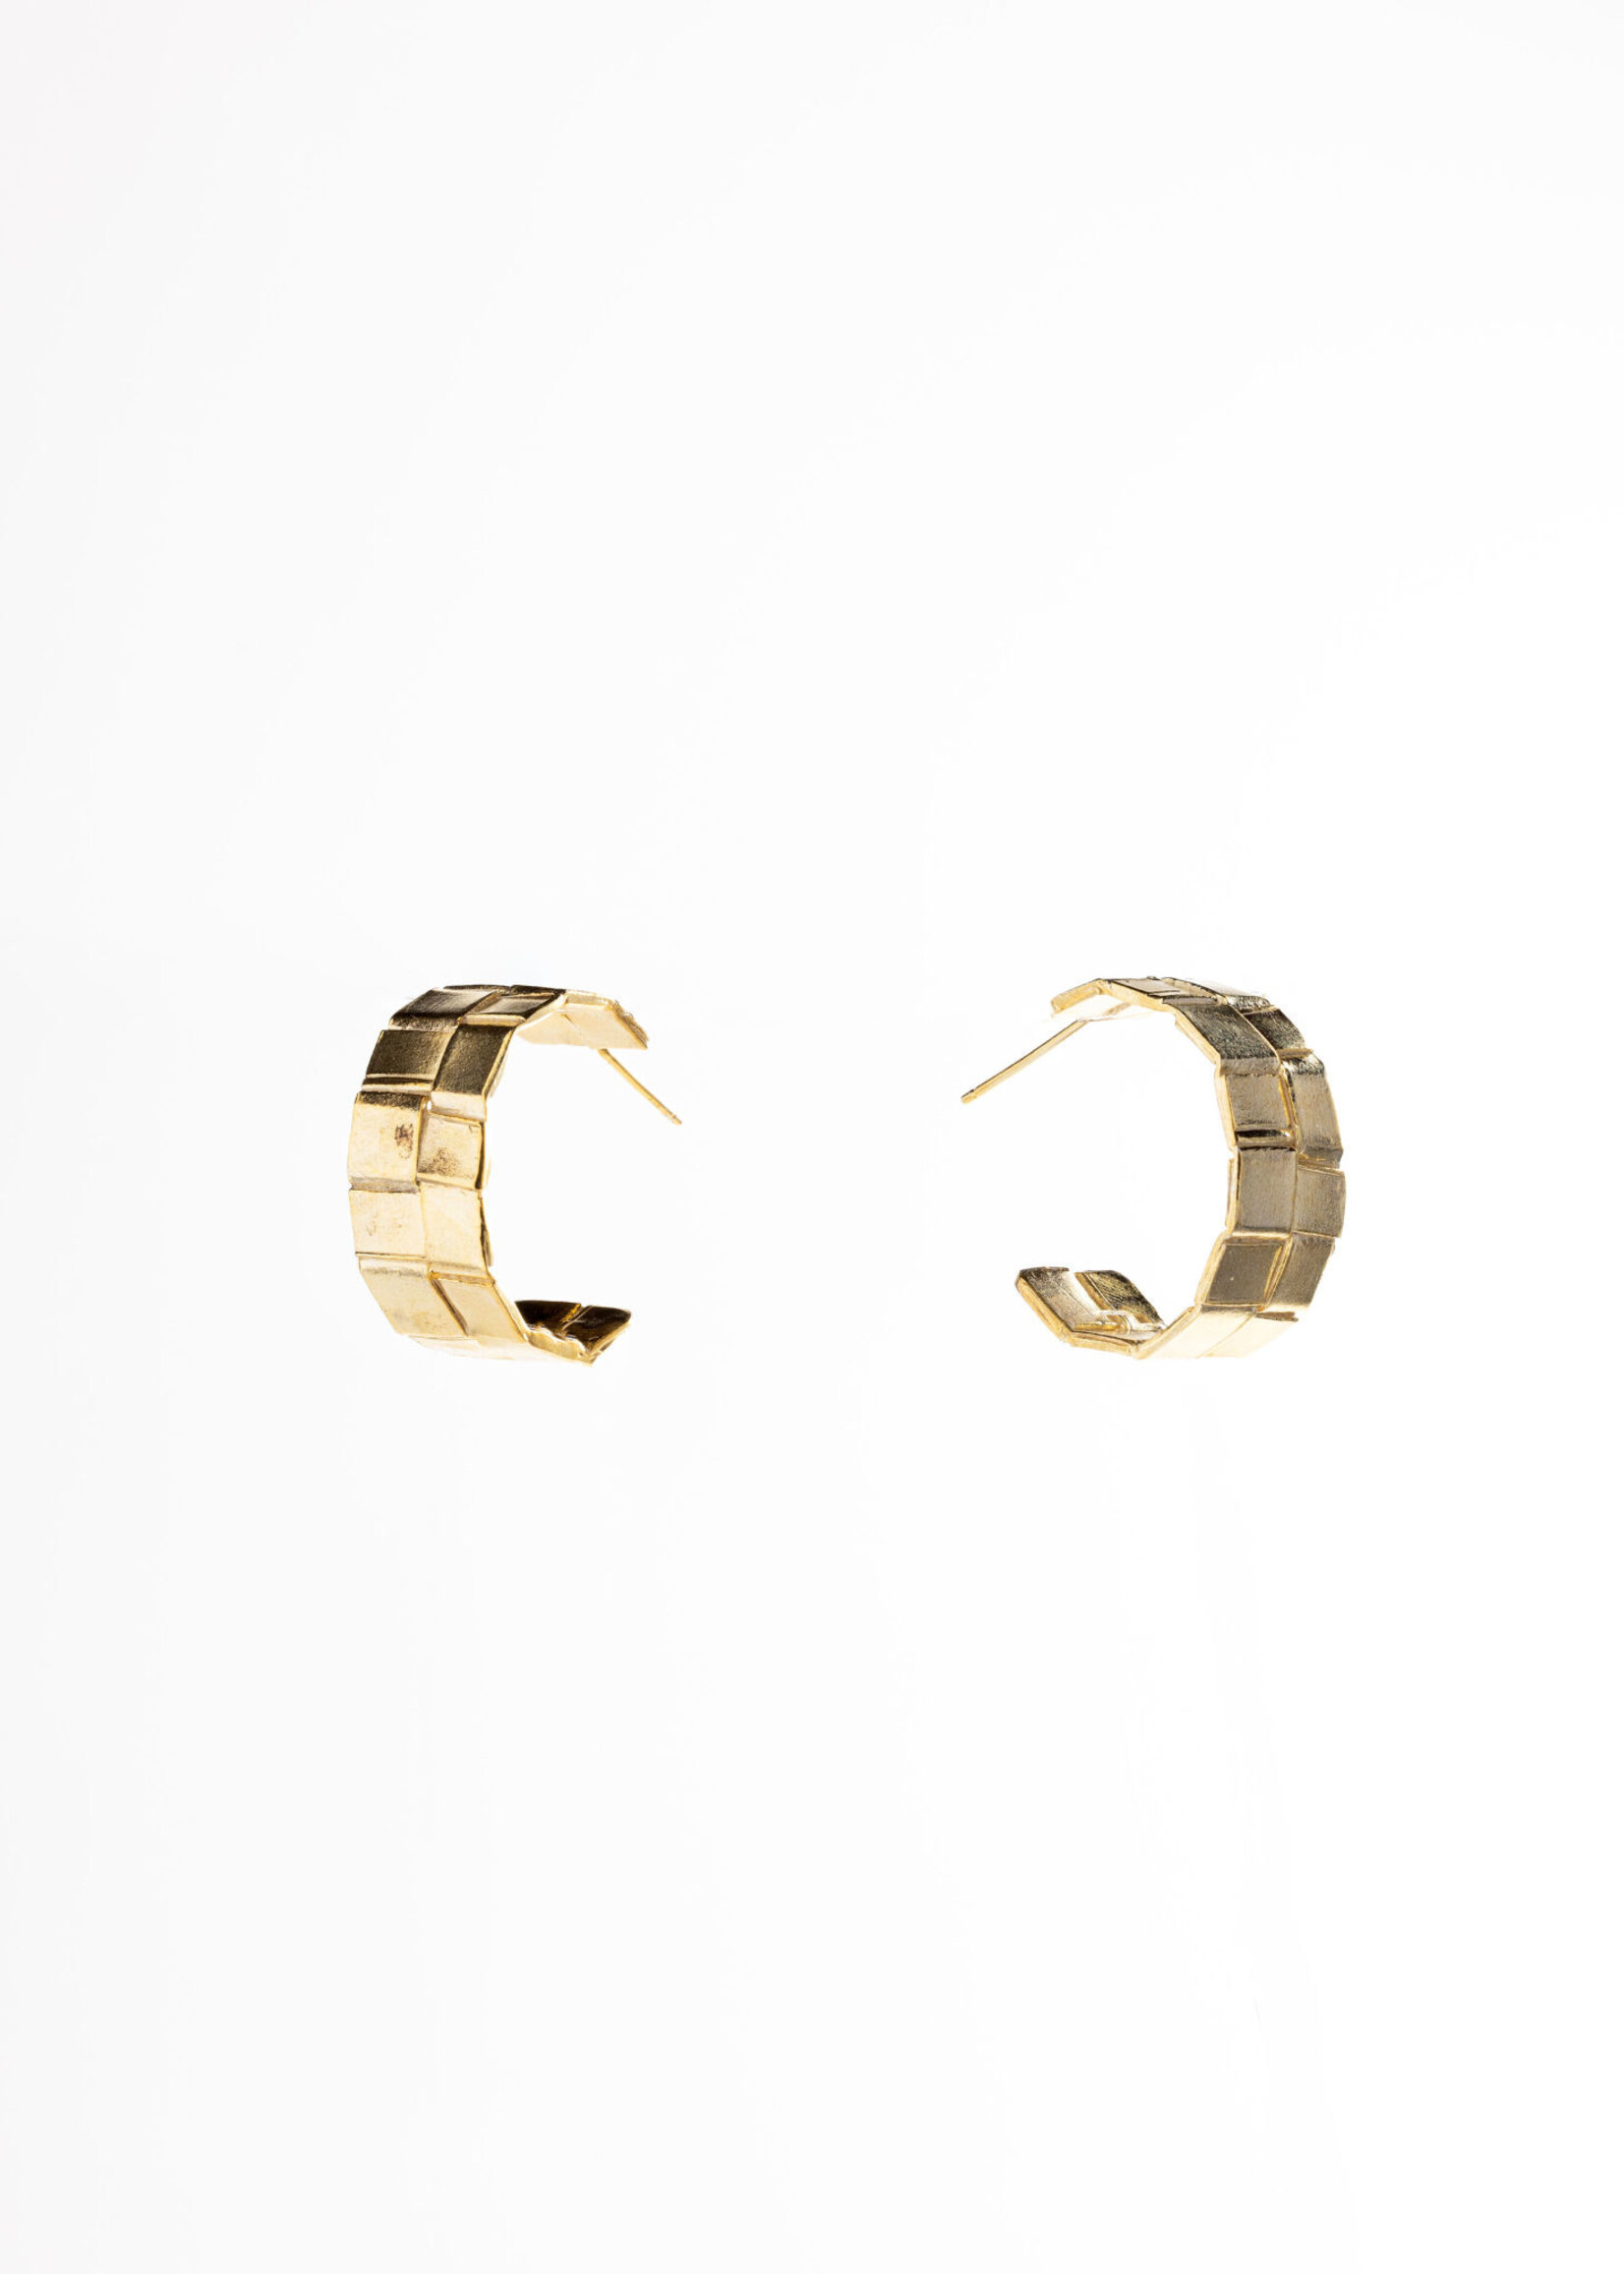 Sydnie Wainland Gold Double Woven Hoops